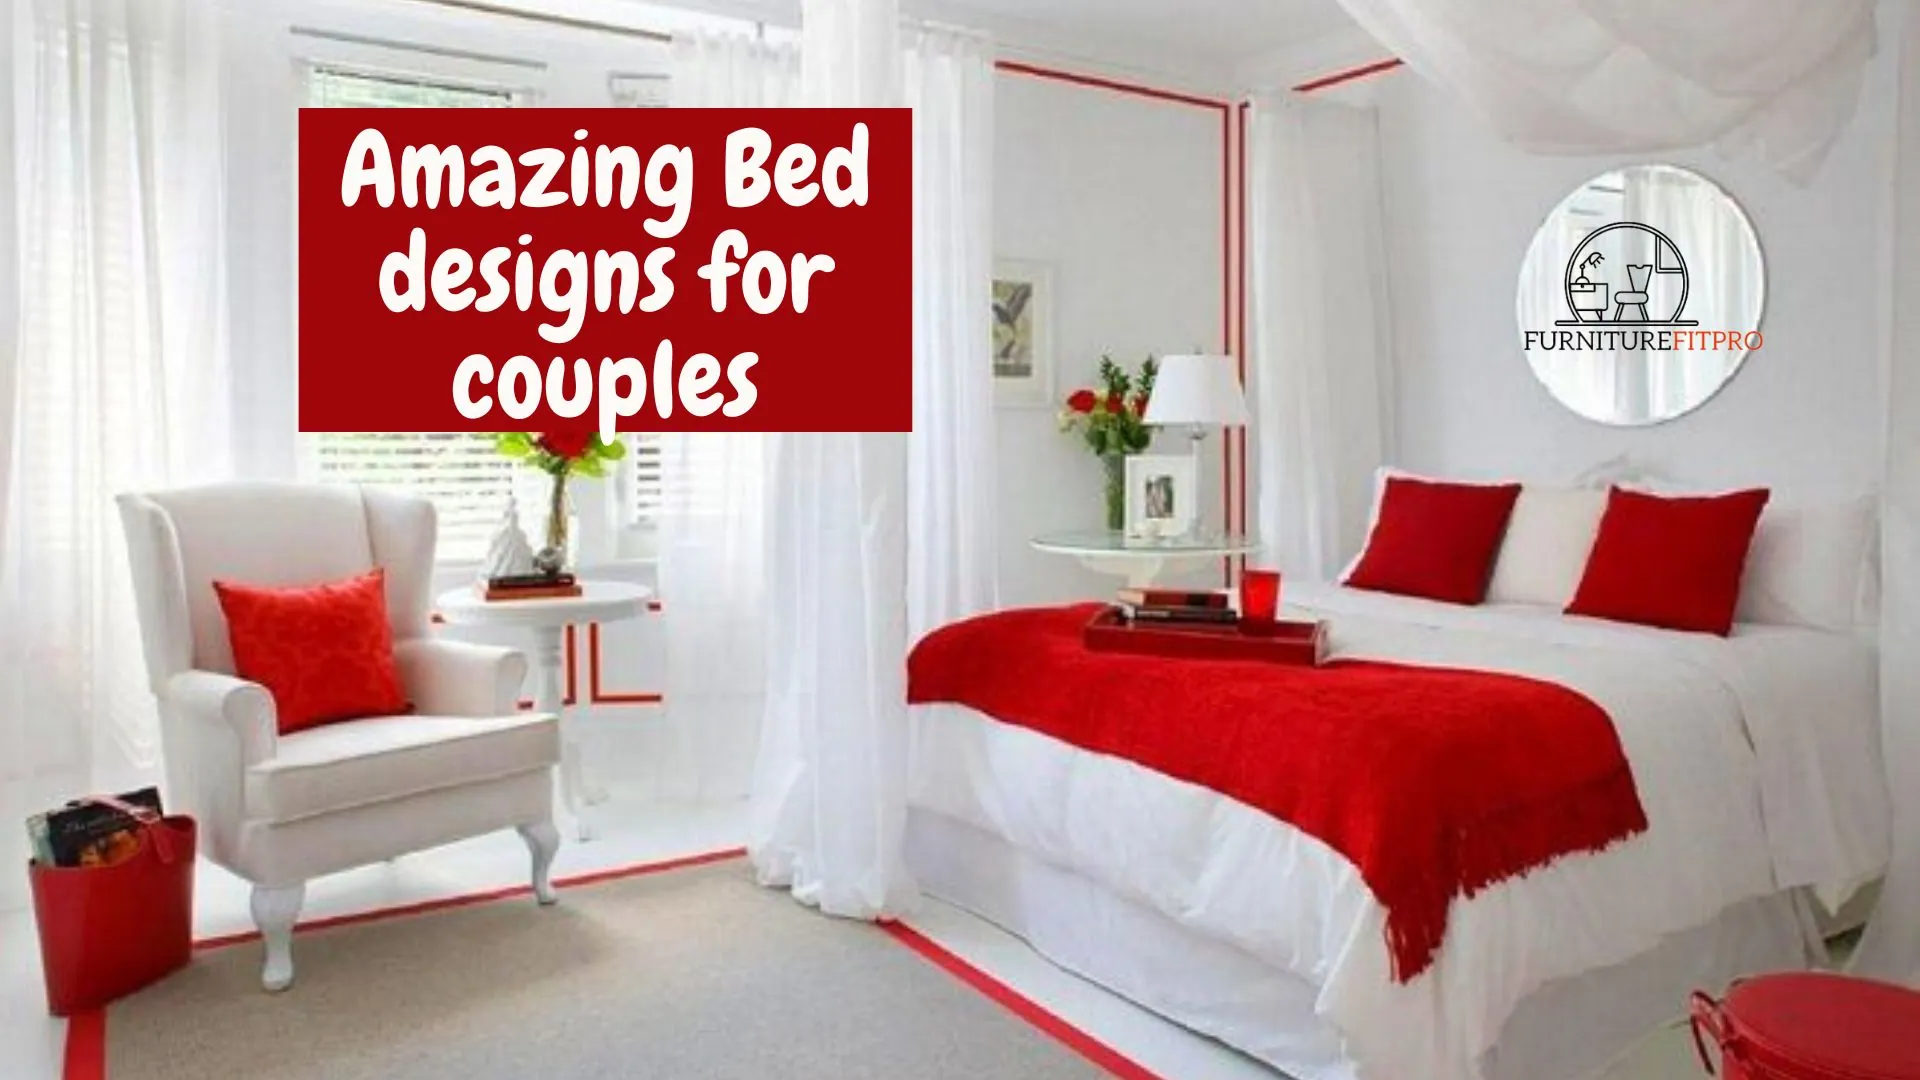 Bed designs for couples